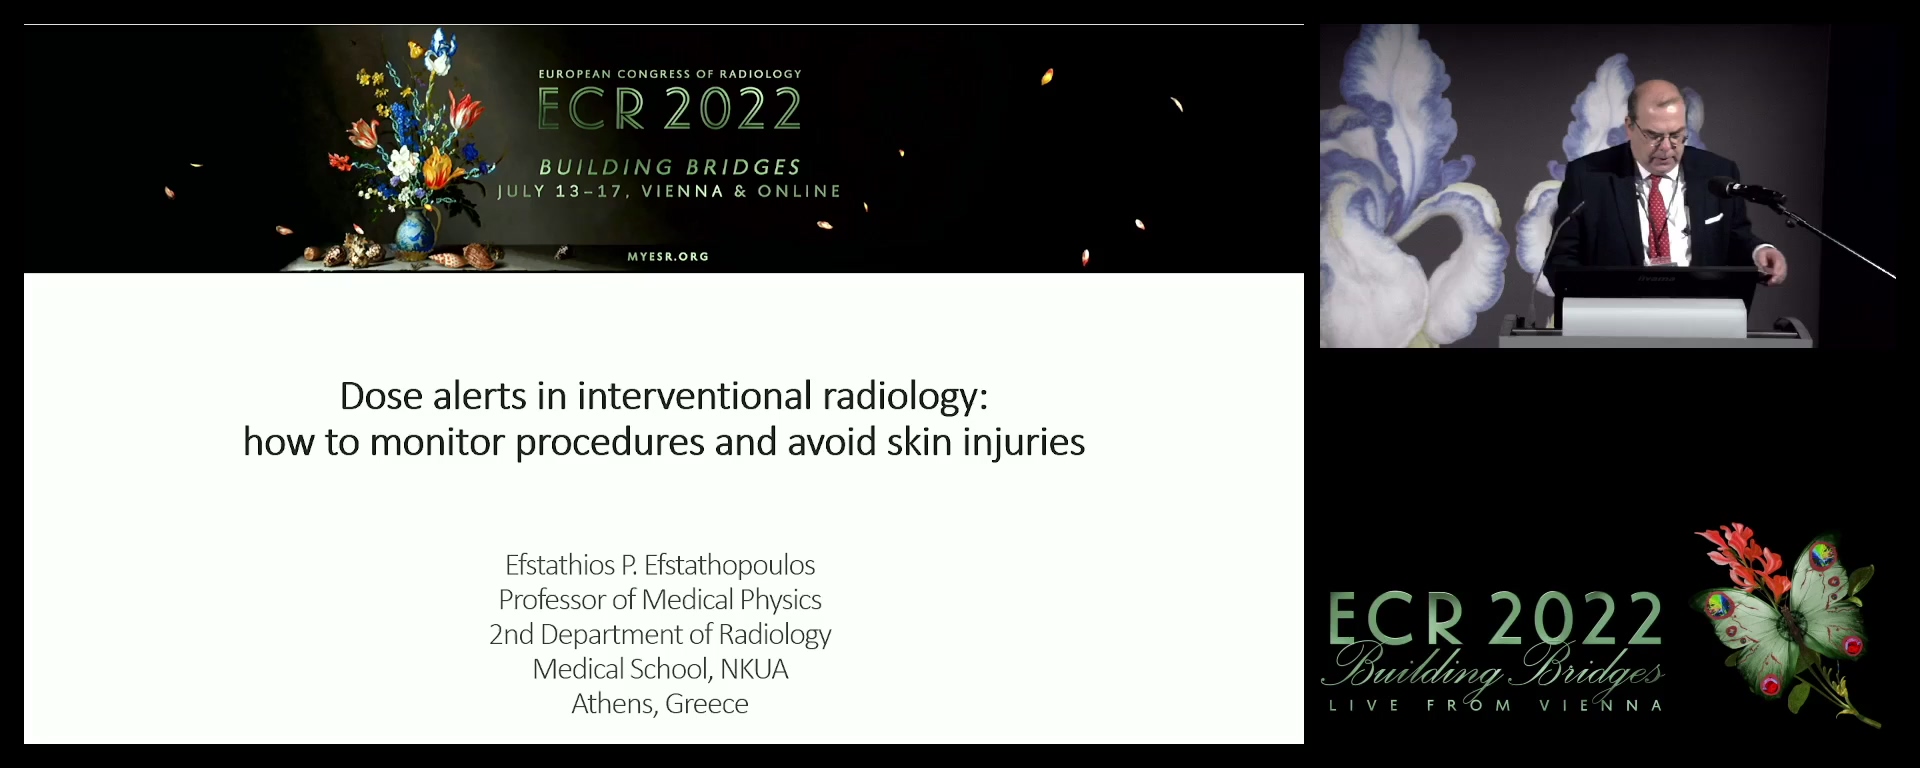 Dose alerts in interventional radiology: how to monitor procedures and avoid skin injuries - Efstathios Efstathopoulos, Alimos / GR